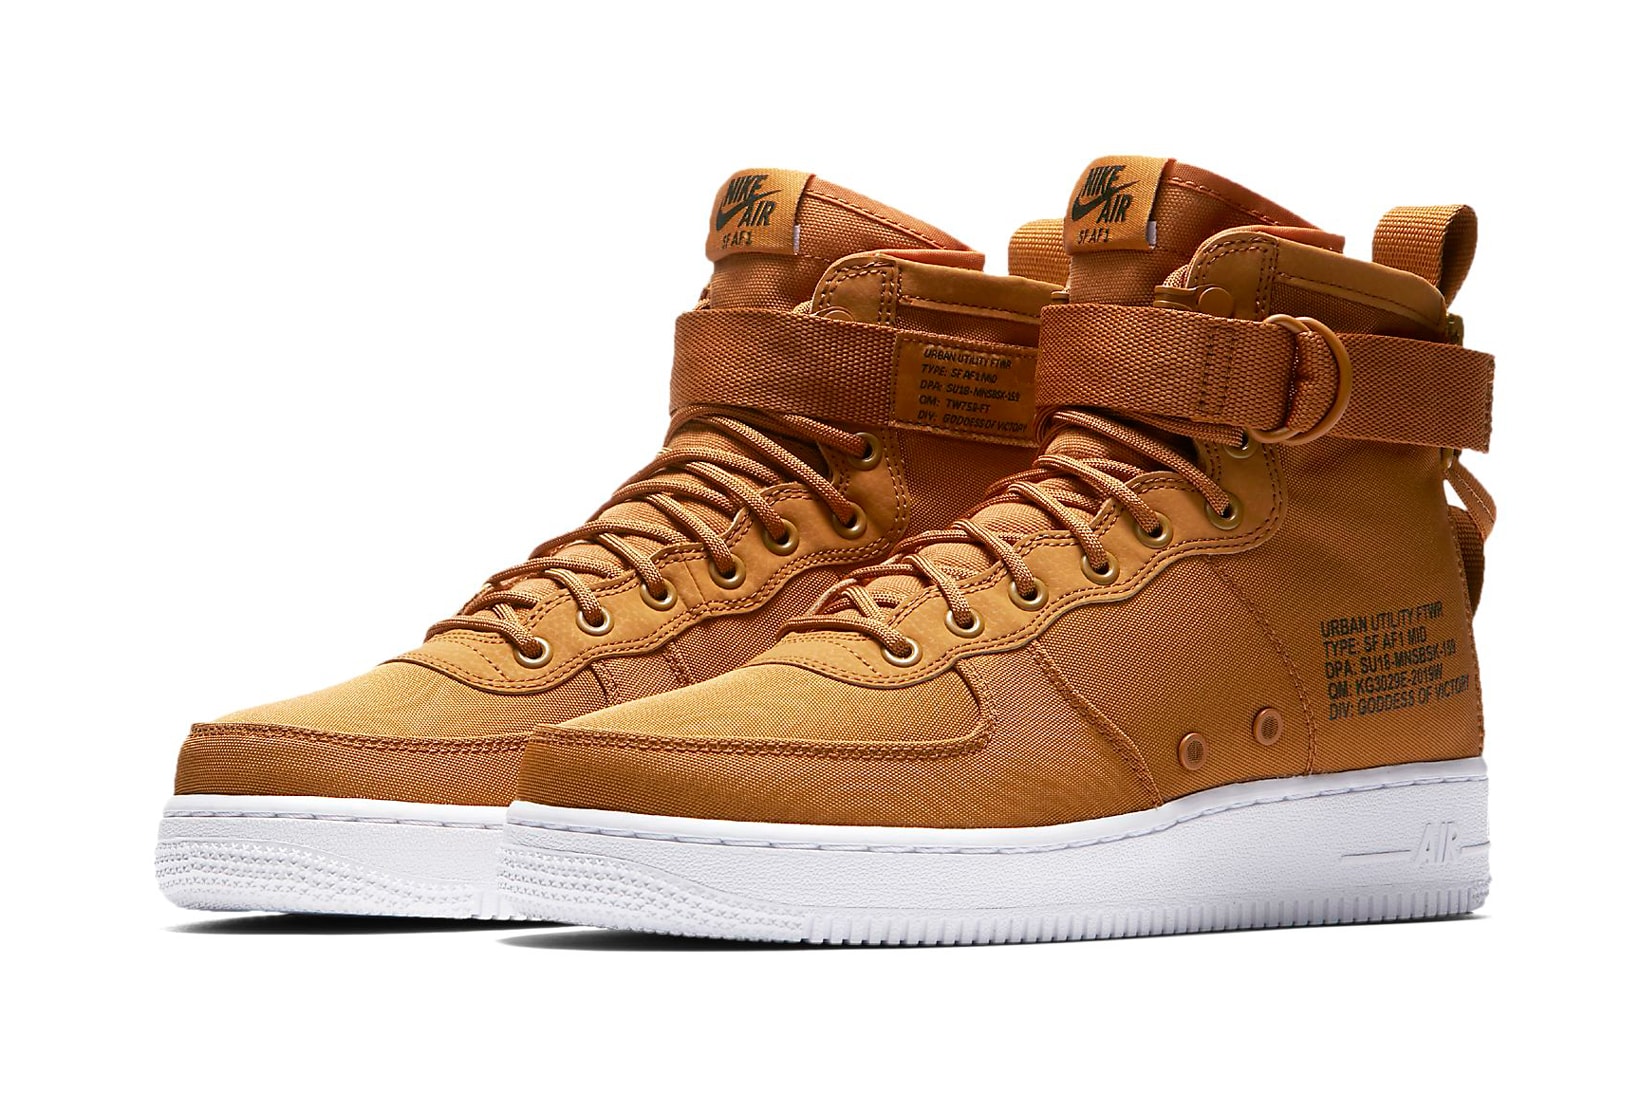 Nike SF AF1 Mid Desert Ocre Yellow Mustard Timberland Release Info Date Drops Air Force 1